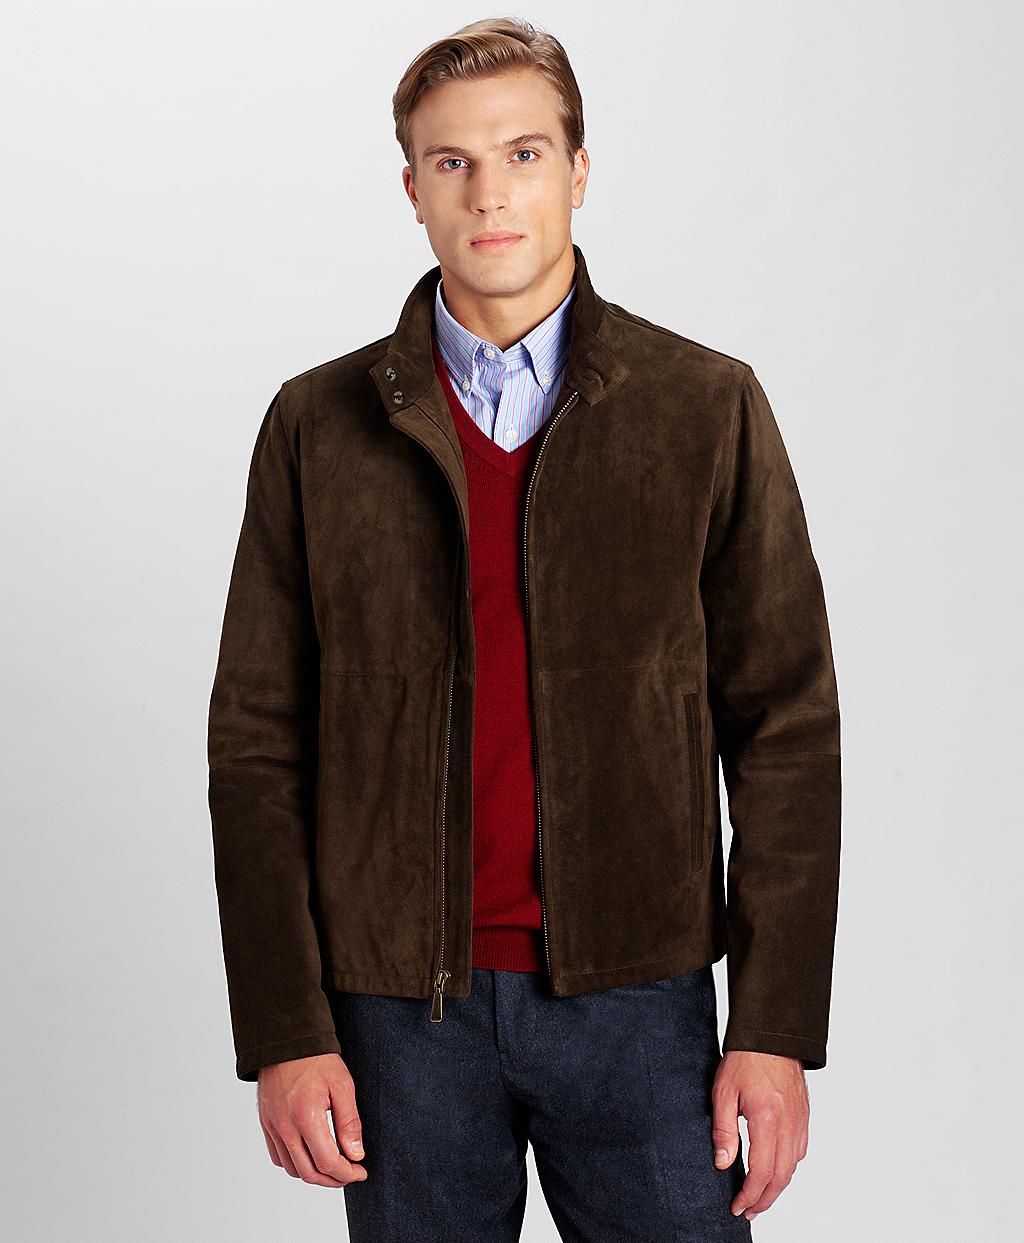 Lyst - Brooks Brothers Split Calf Suede Jacket in Green for Men